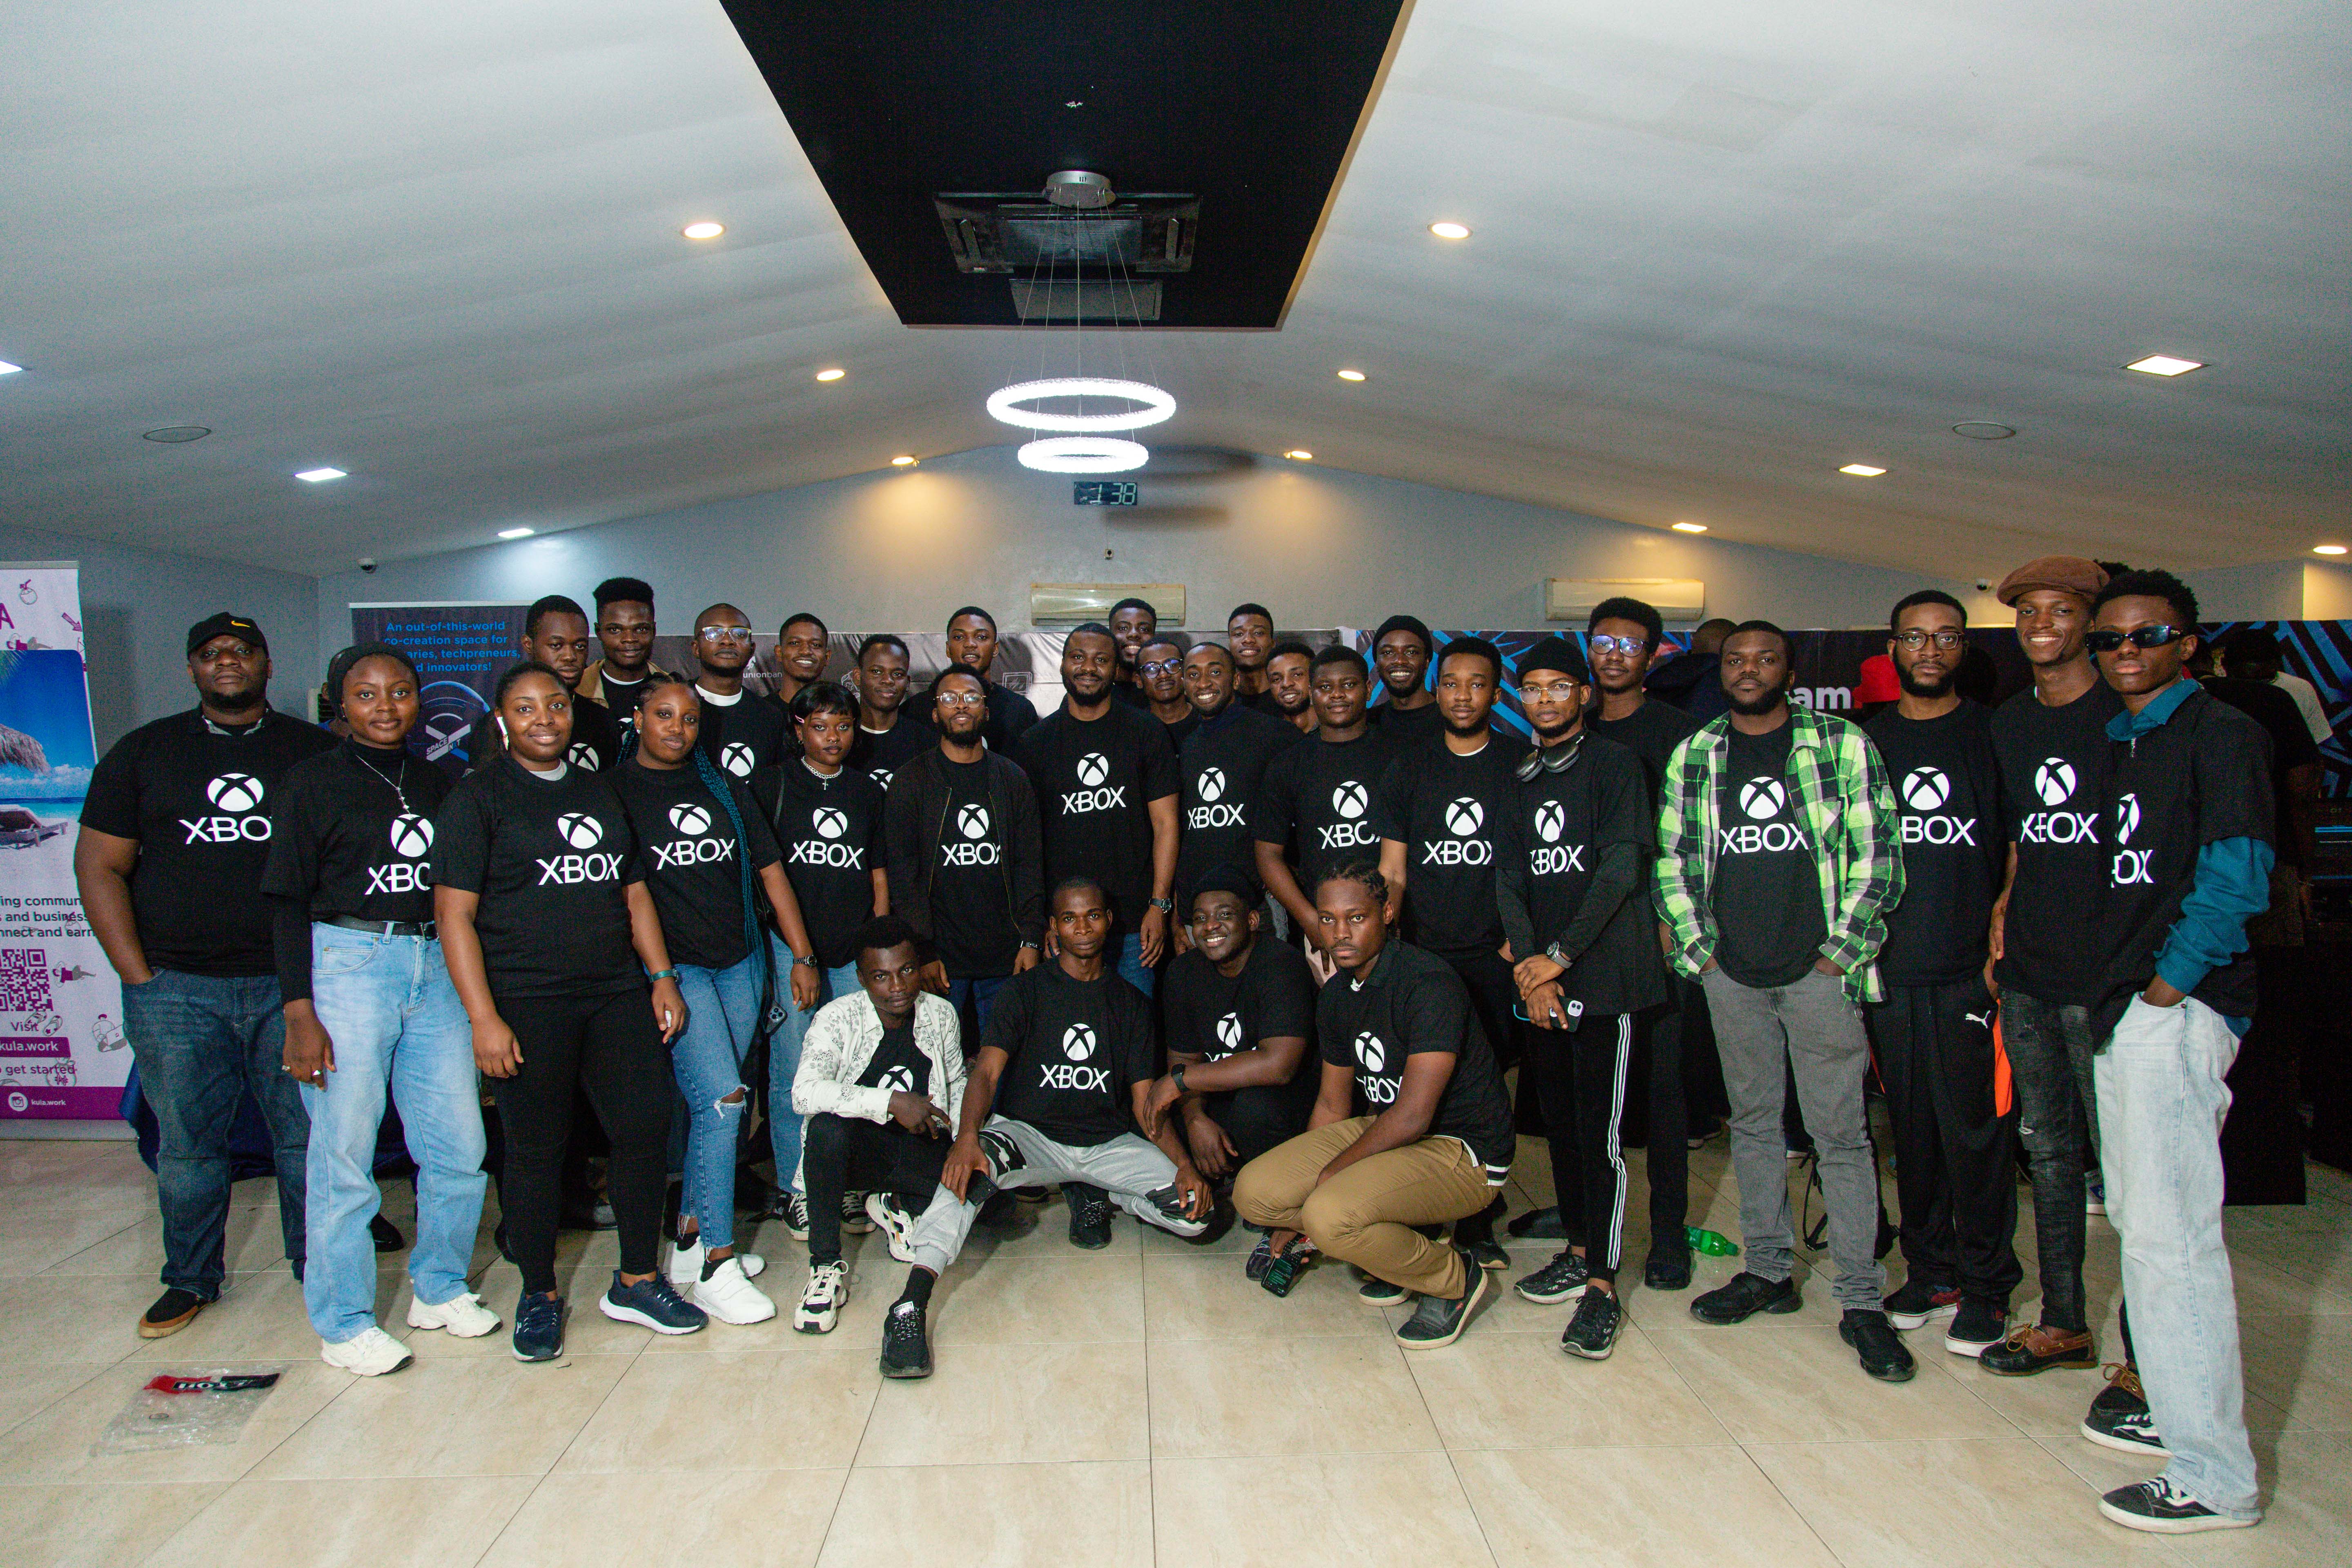 AfricaComicade's Gamathon returns to spark the creative and interactive media industry